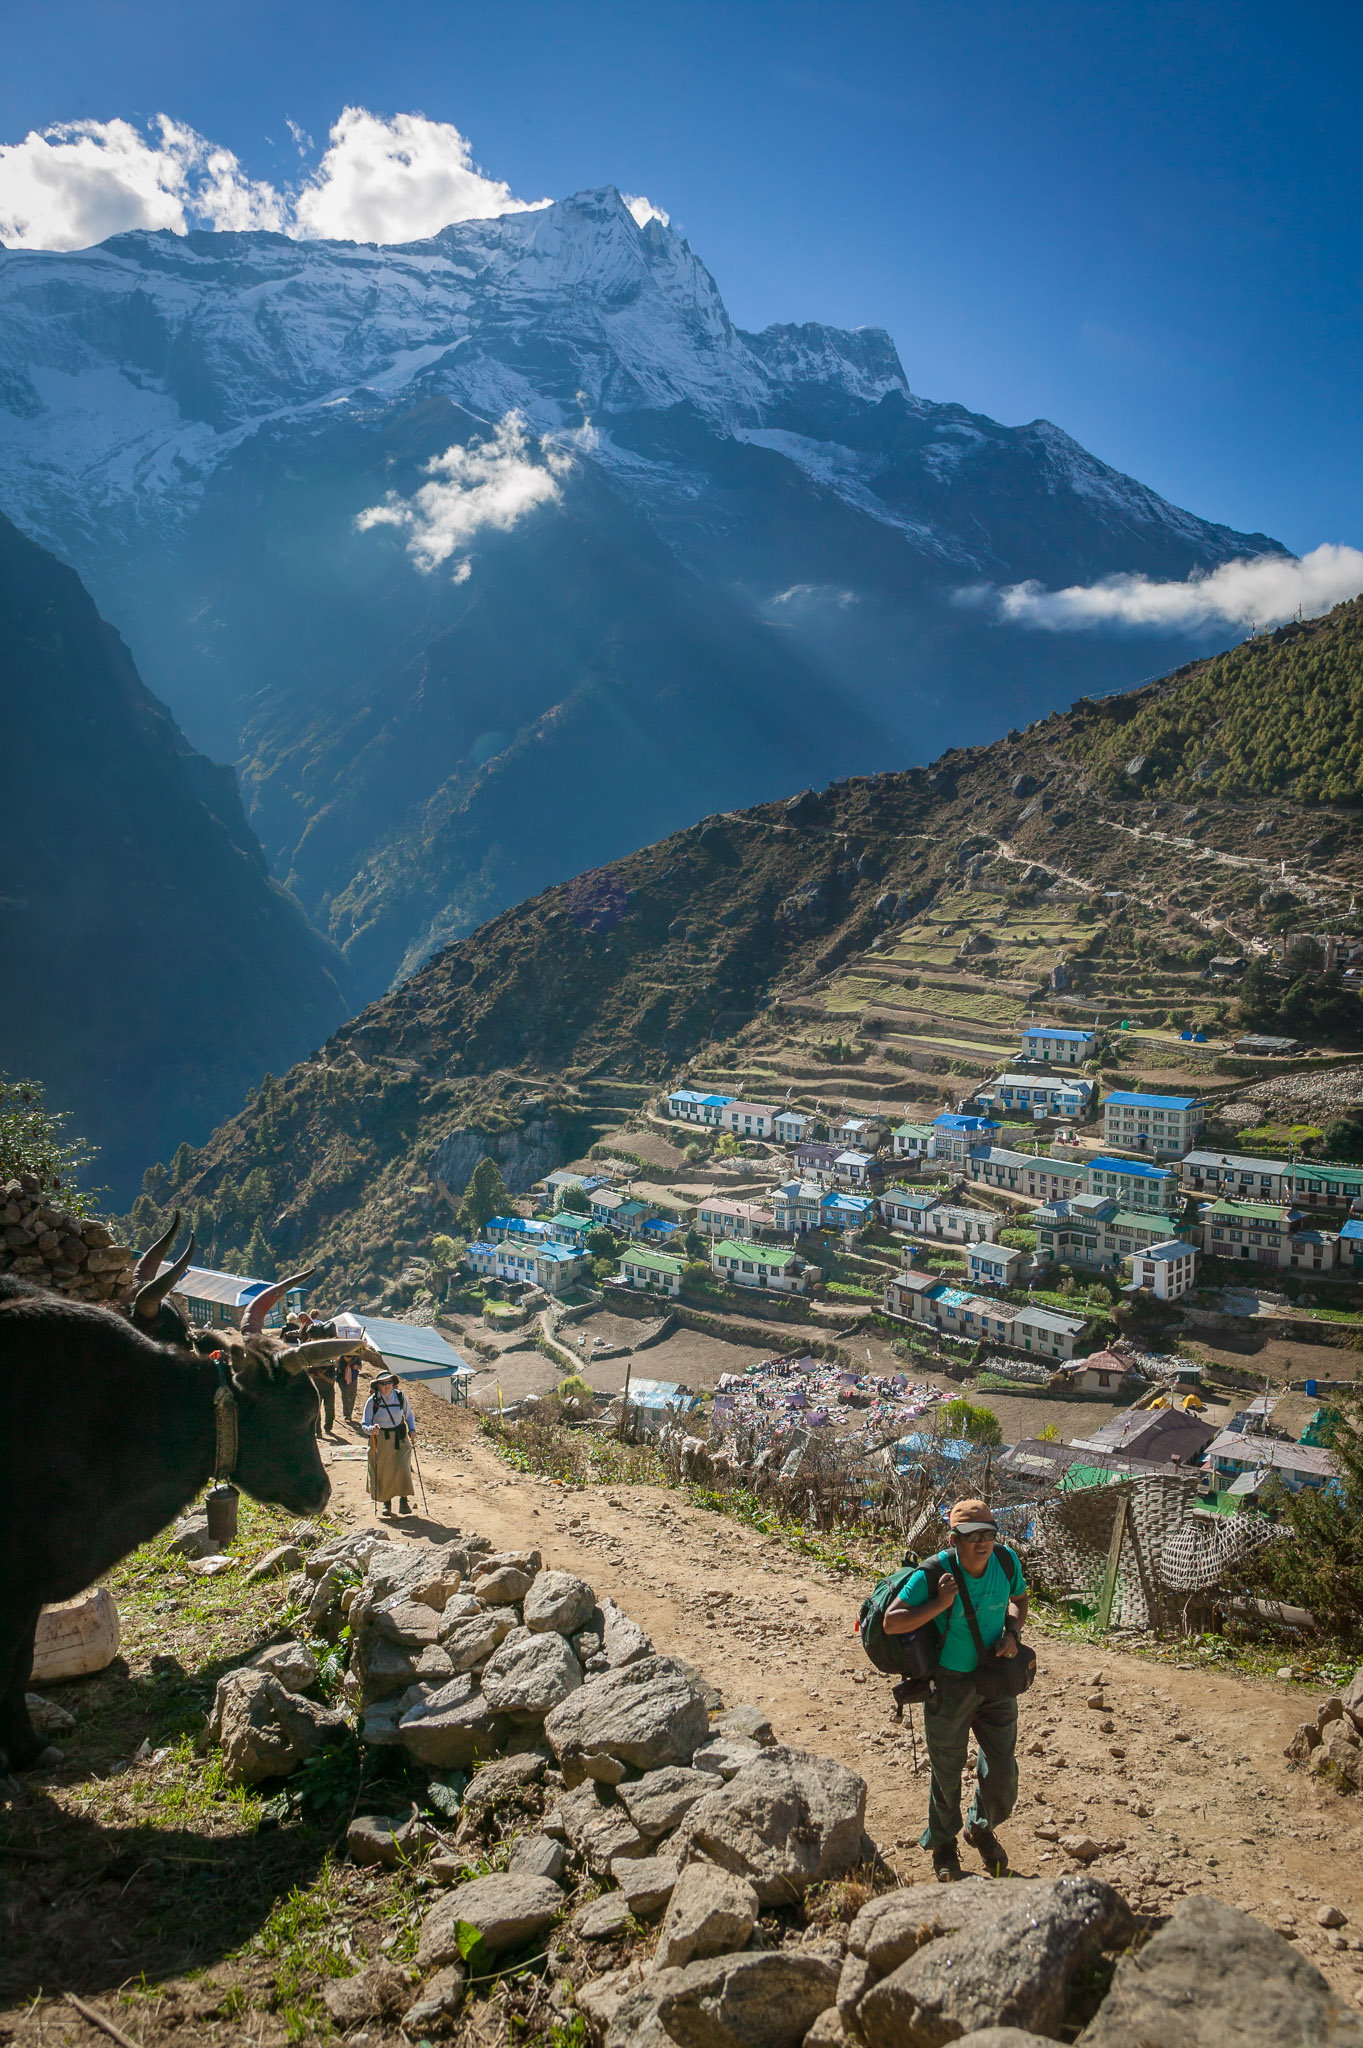 Coming into Namche